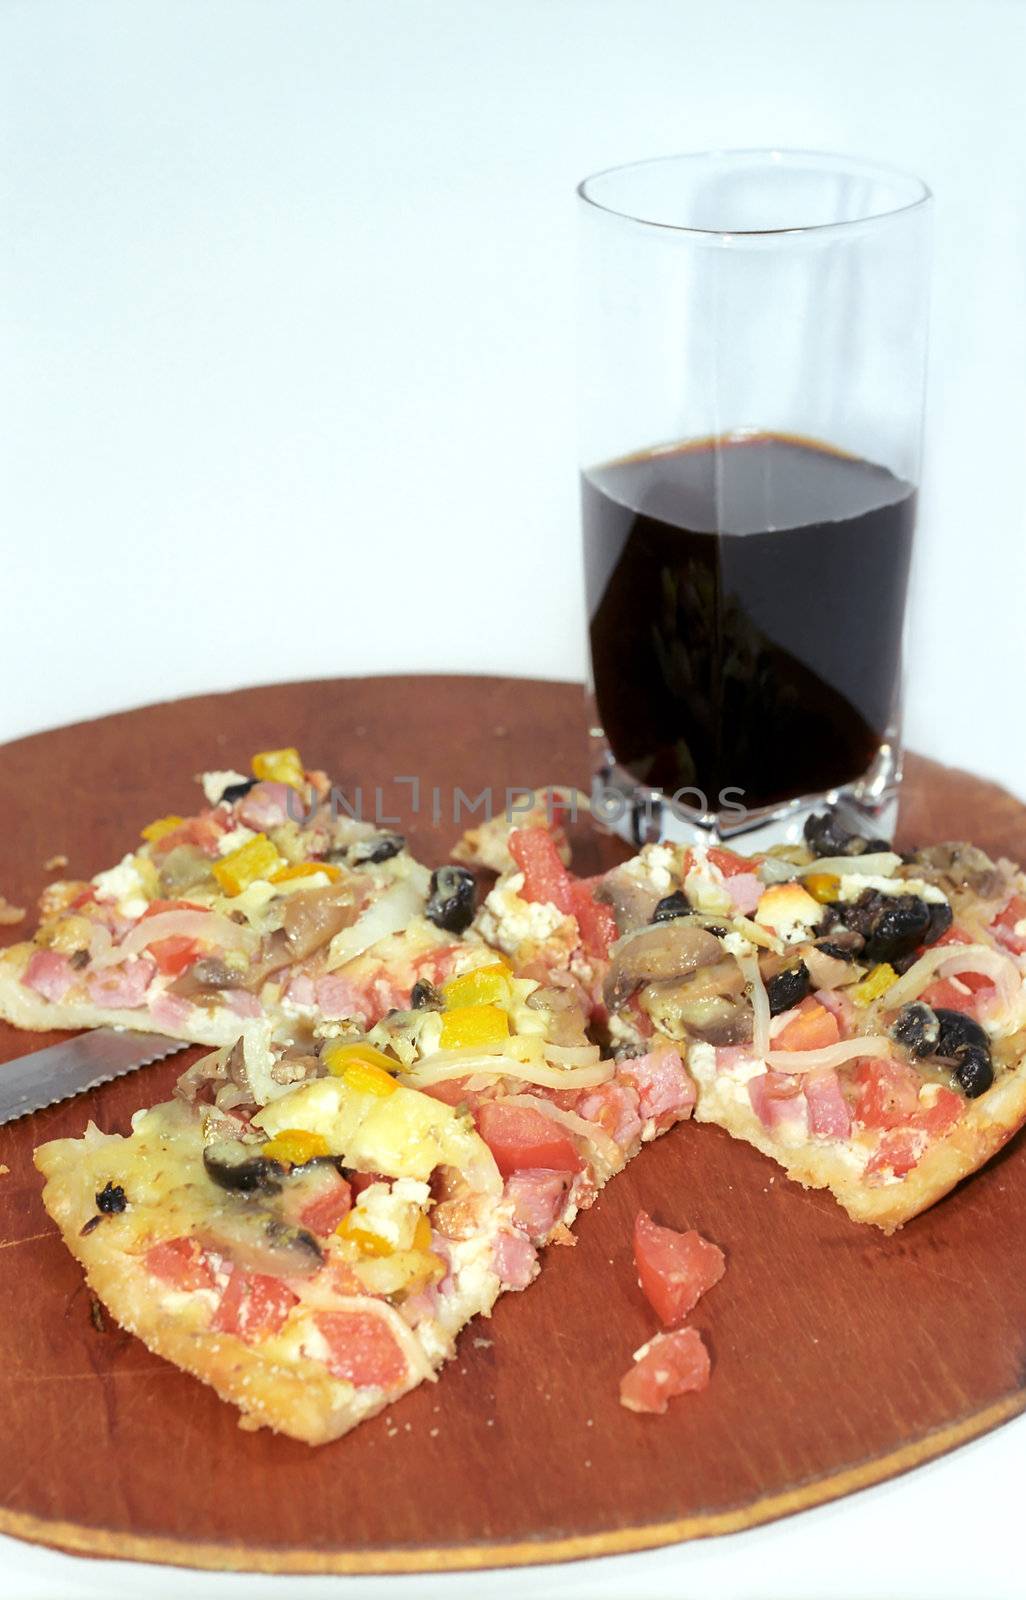 Parts of cutting pizza and dark drink glass  by mulden